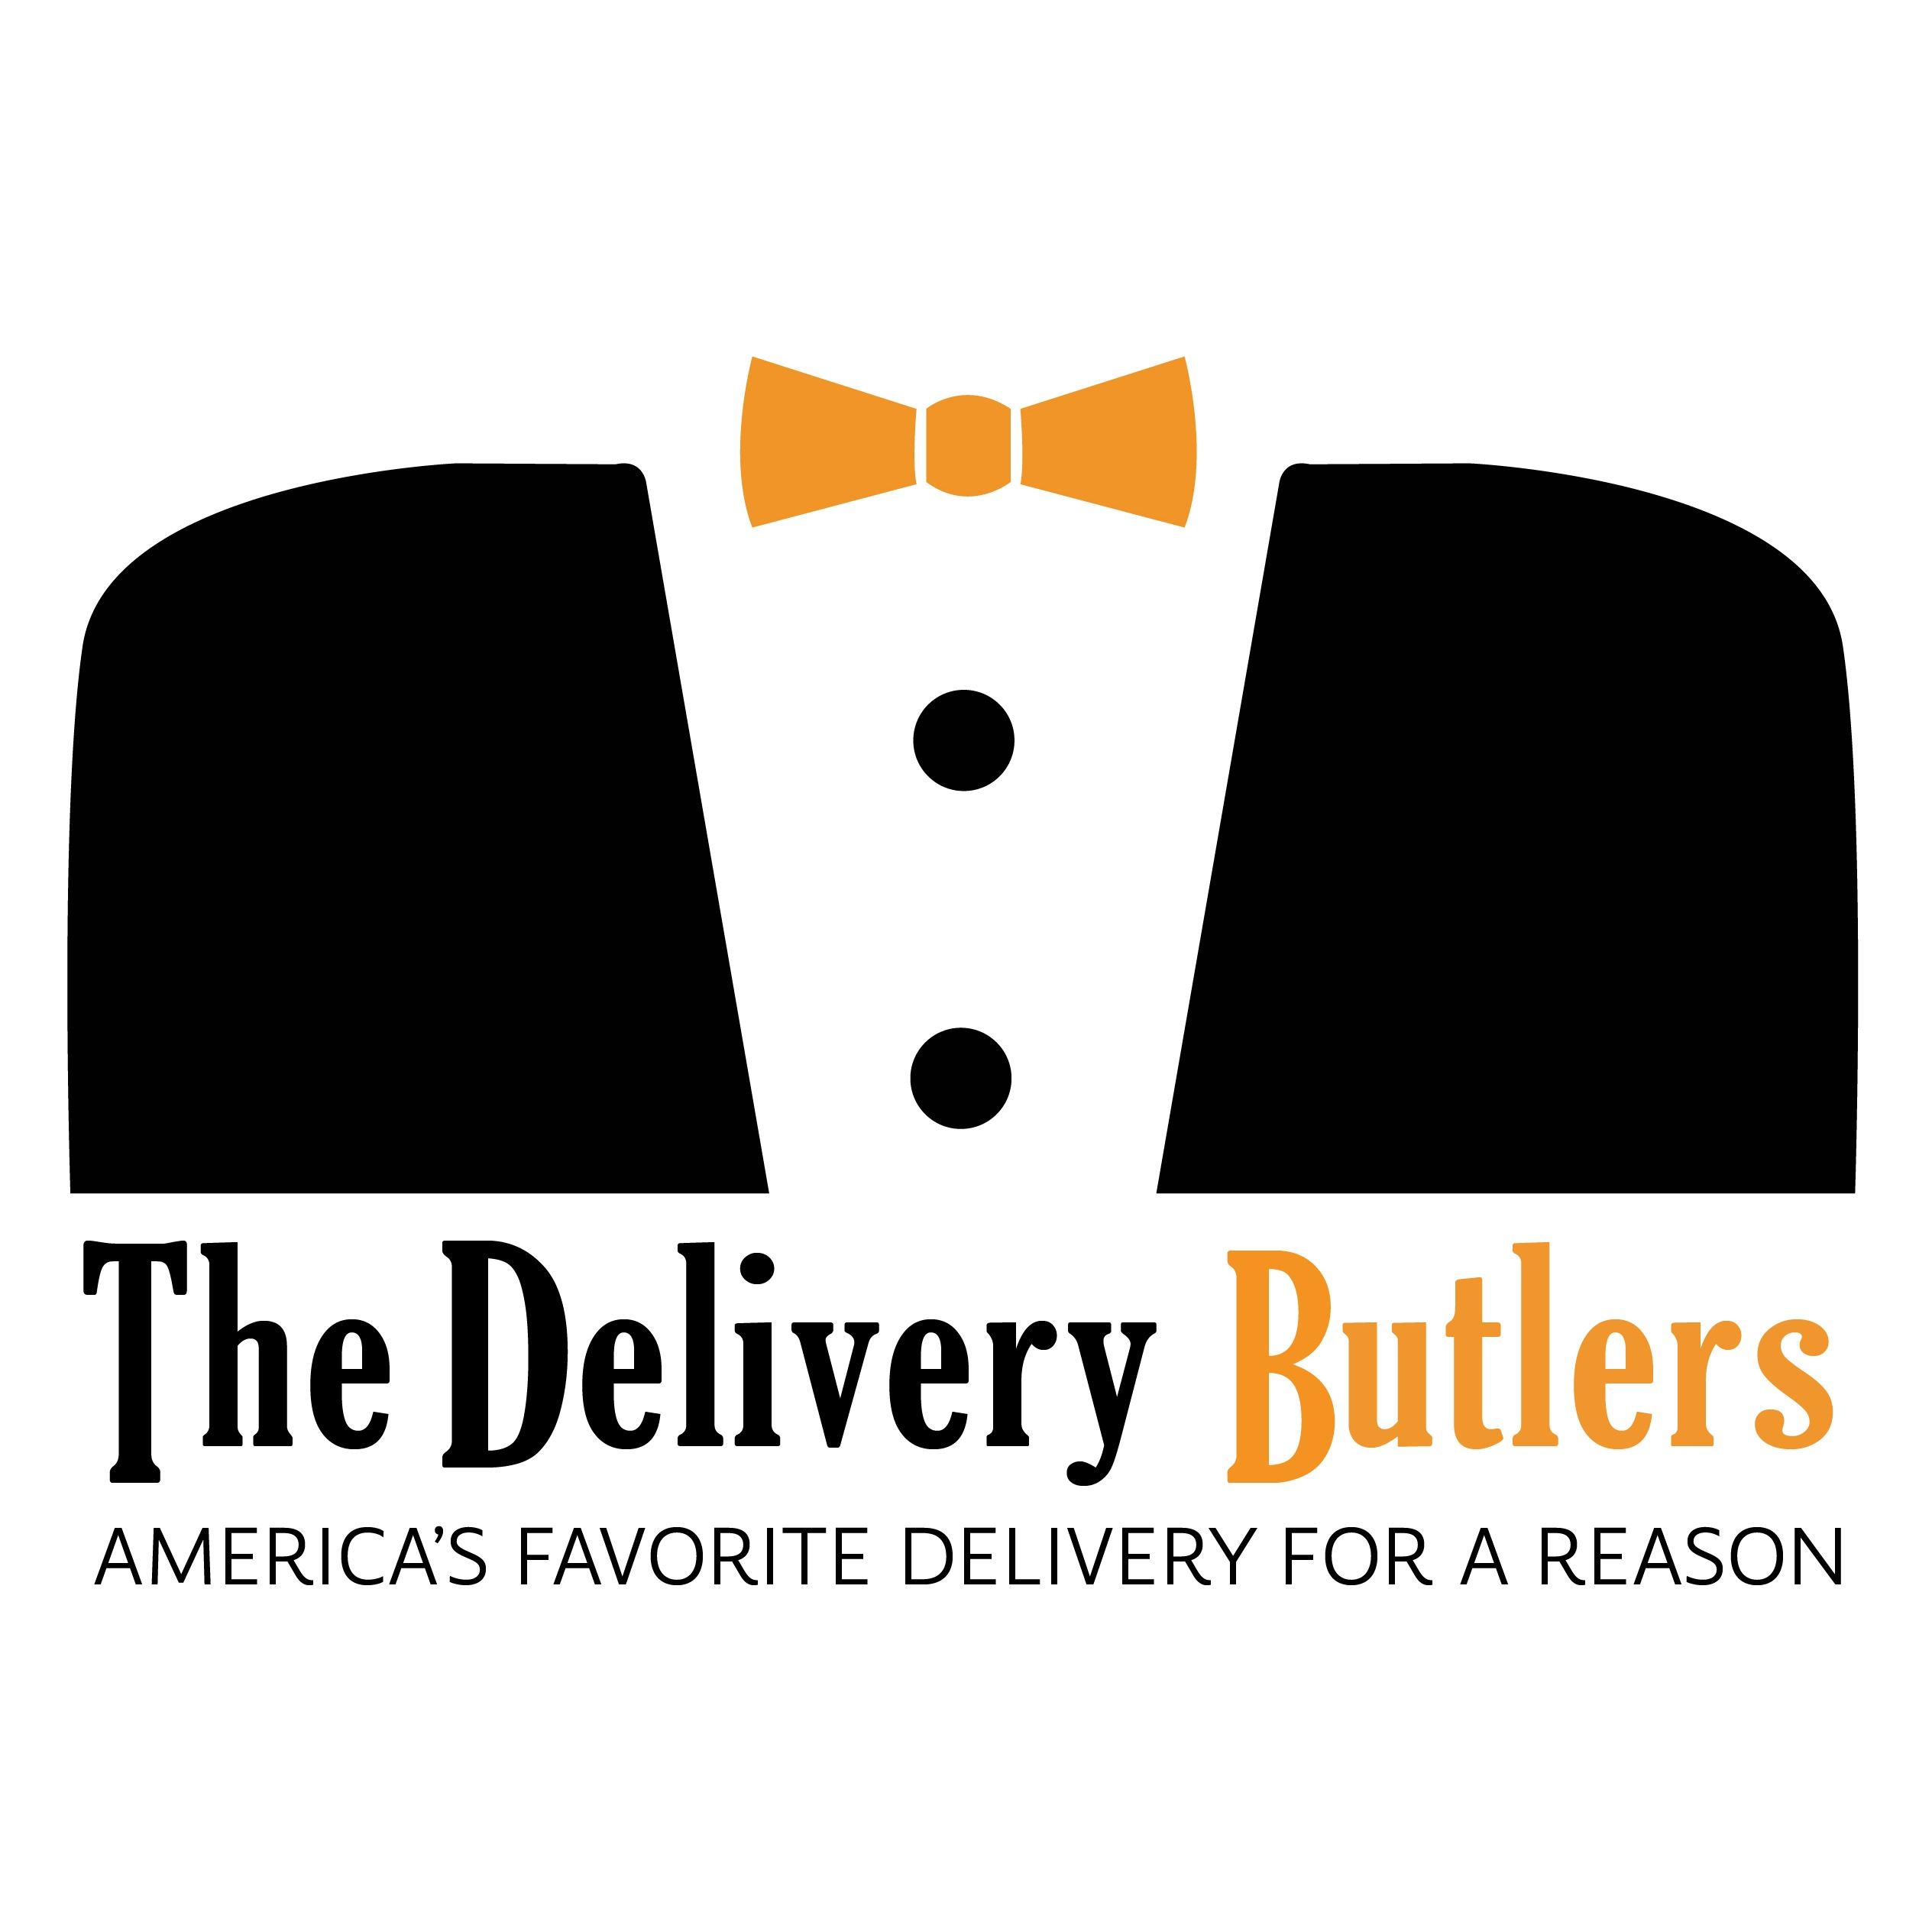 The Delivery Butlers